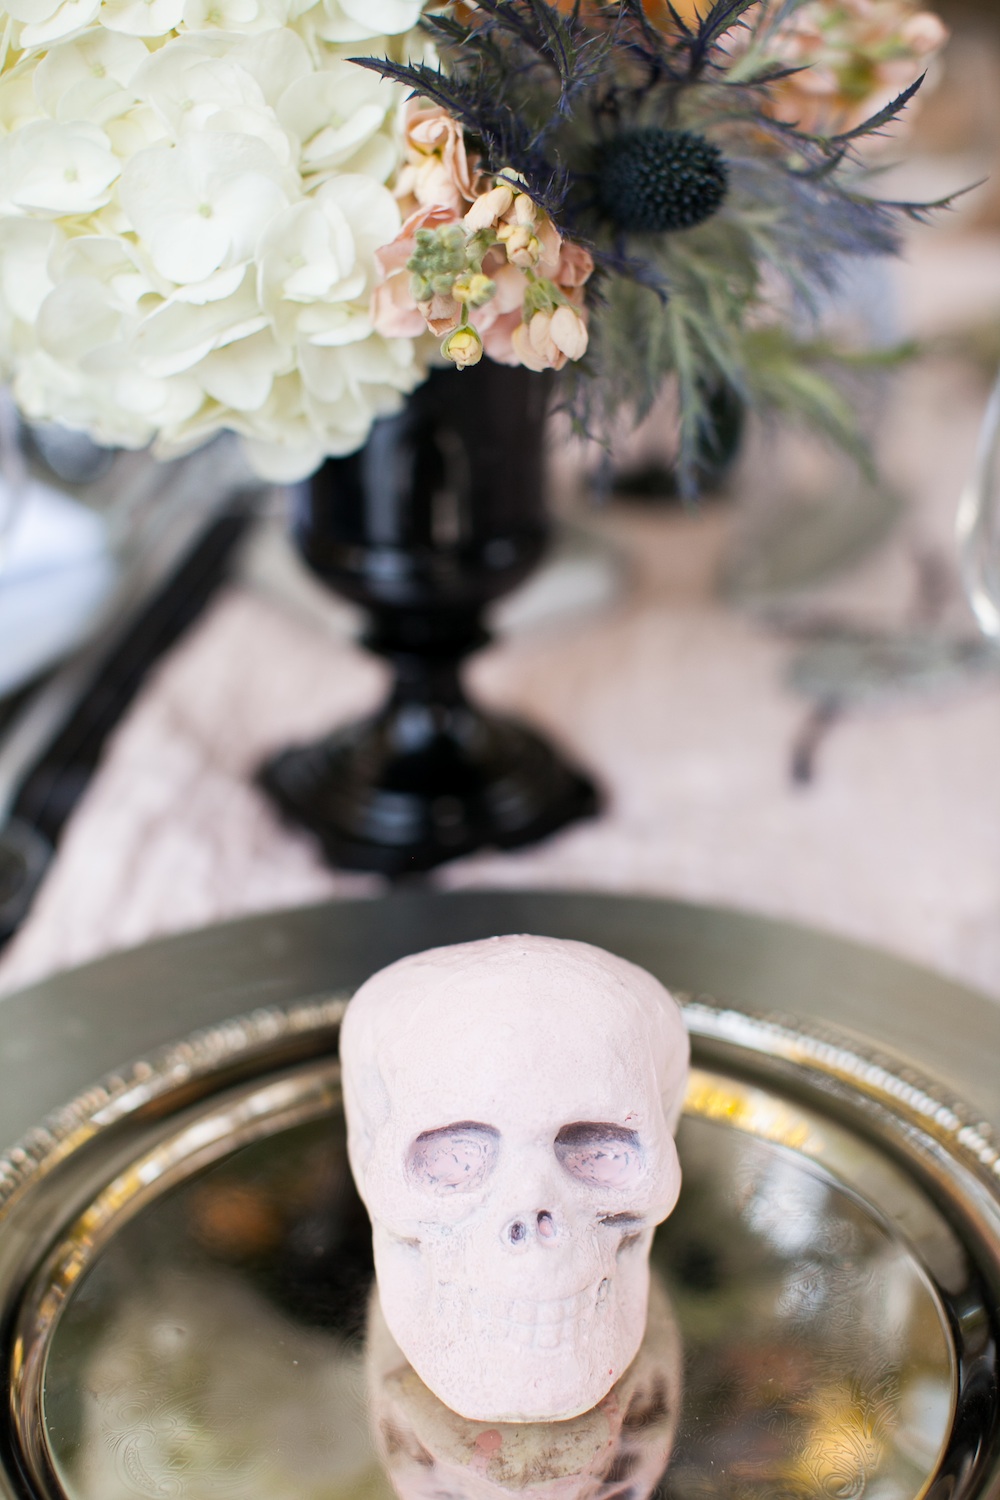  Classy Halloween Wedding Styled Shoot / florals by EightTreeStreet / photo by {a}strid Photography 